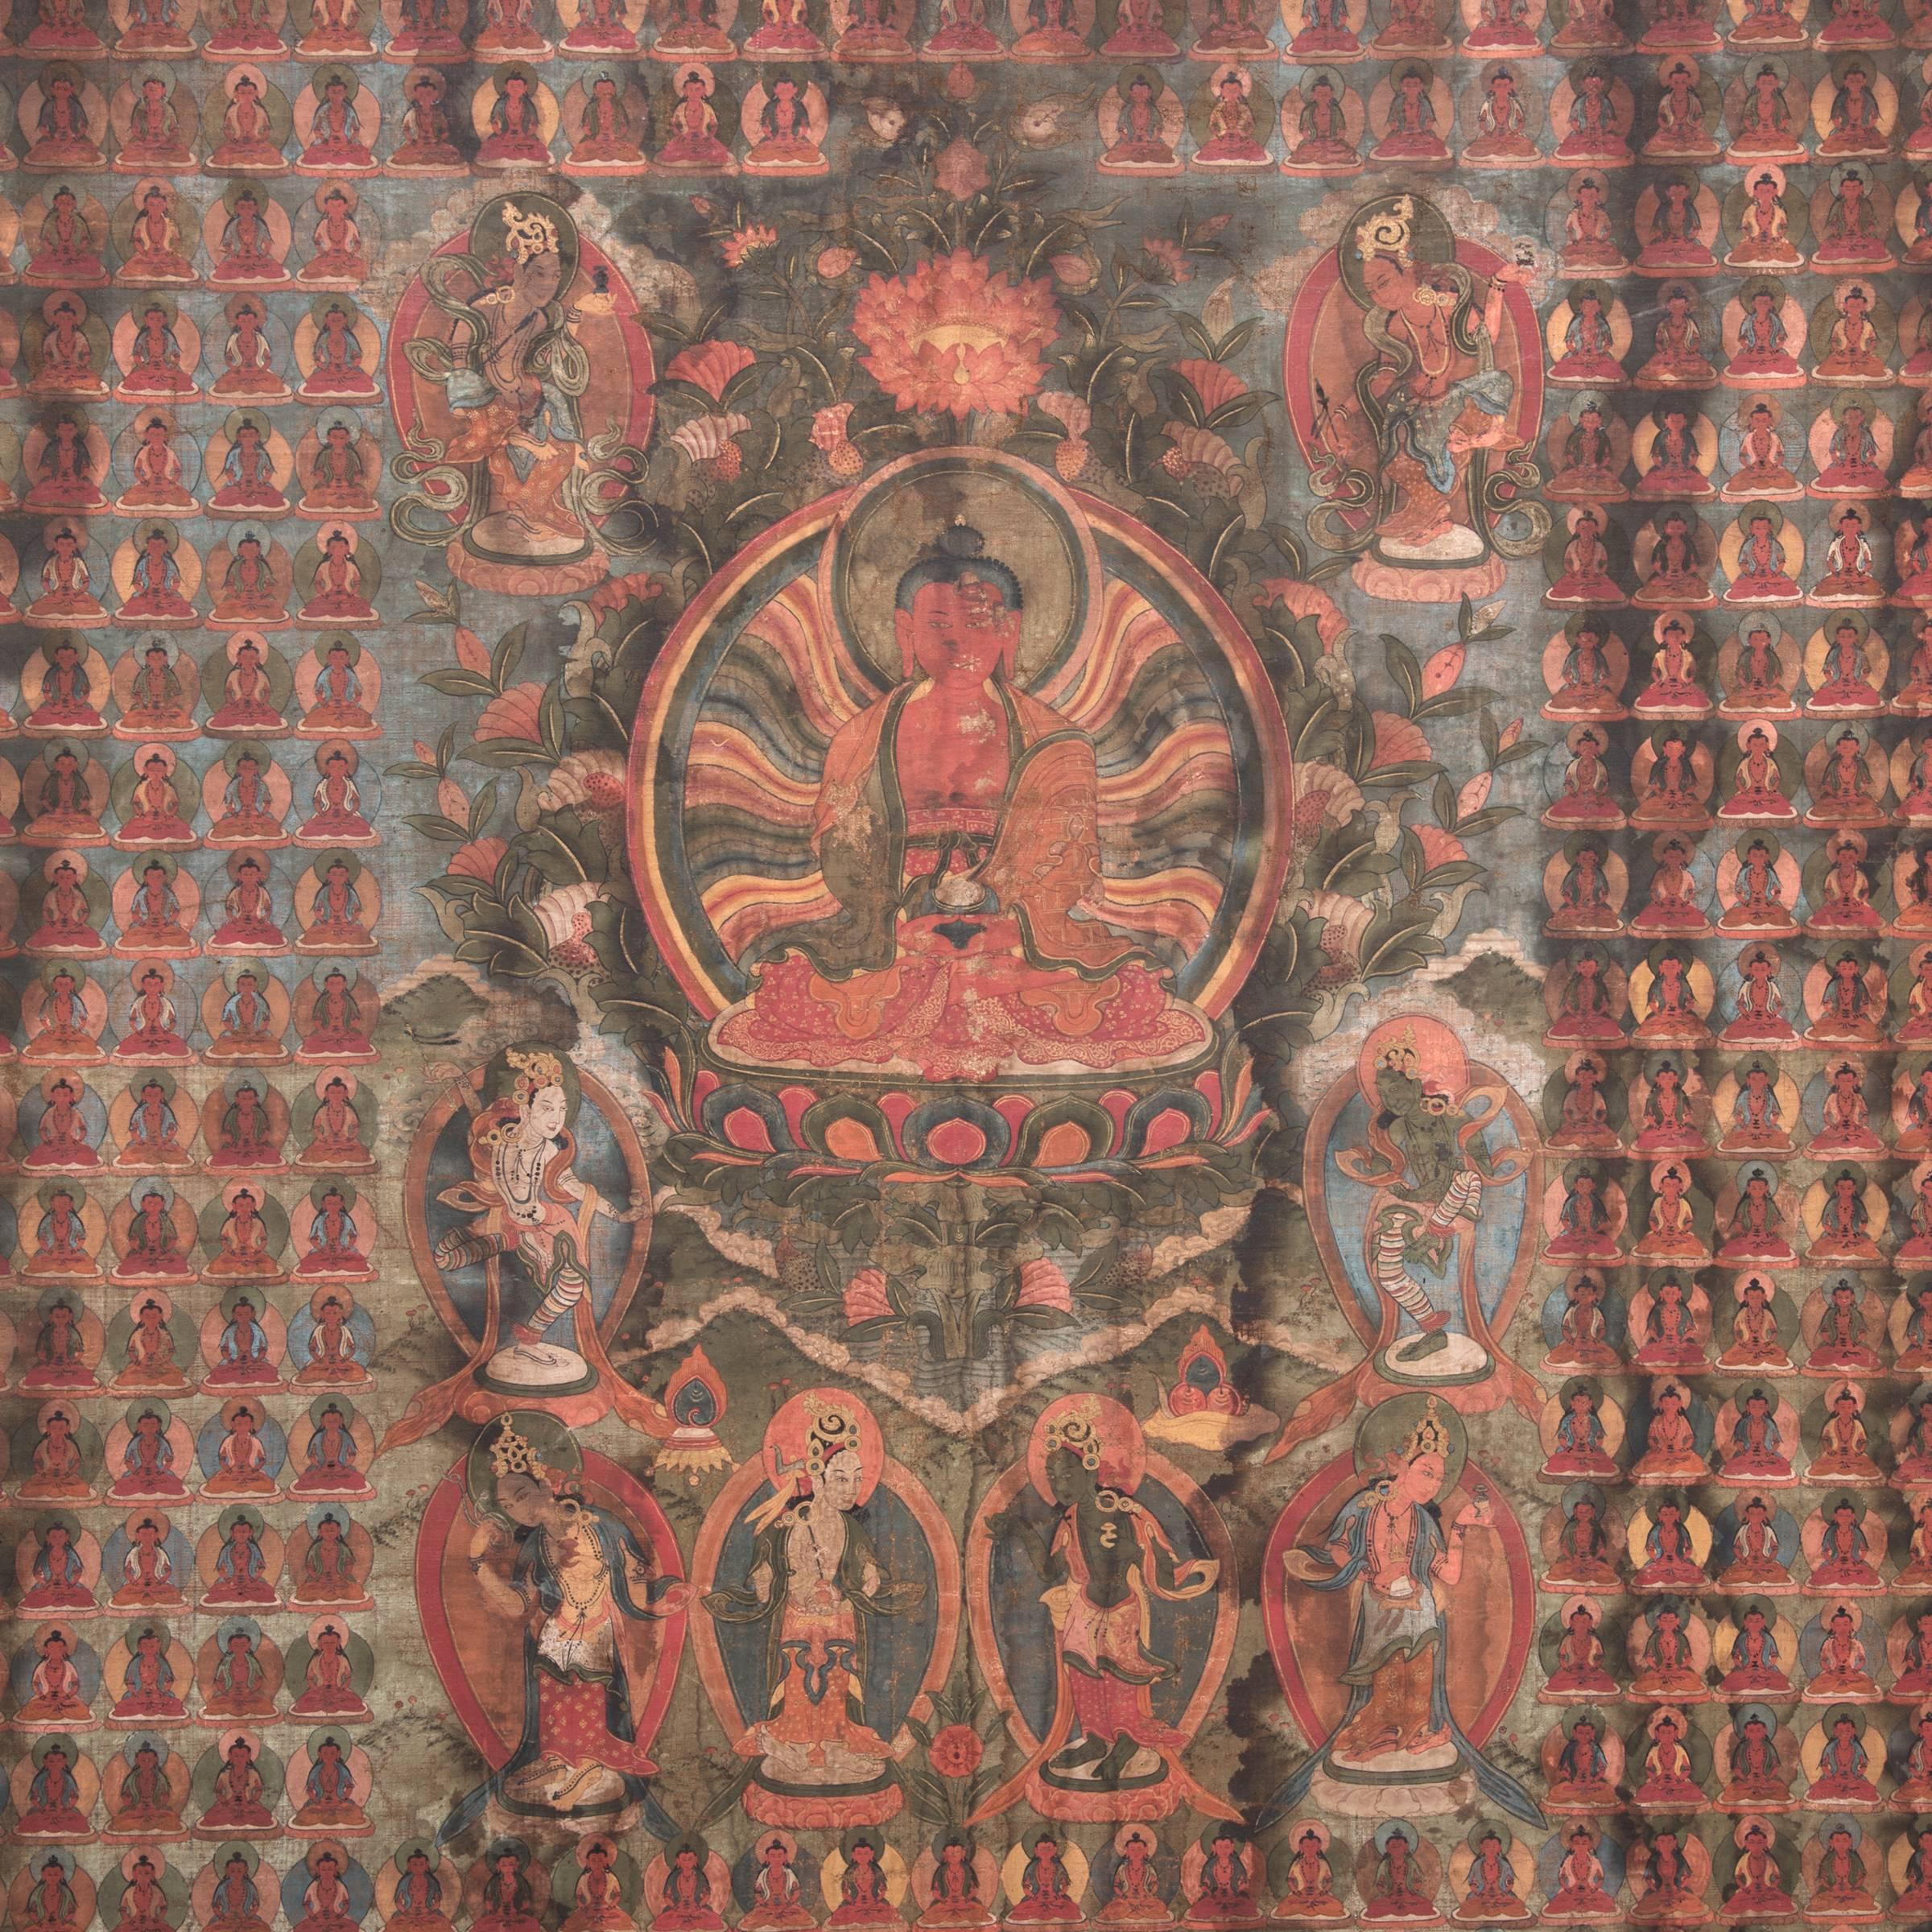 This Tibetan thangka, or sacred painting, is over 300 years old. The rich red, green, and blue hues are still incredibly vibrant. The central figure is a Buddha surrounded by goddesses and attendants, amidst a field of hundreds of seated figures.